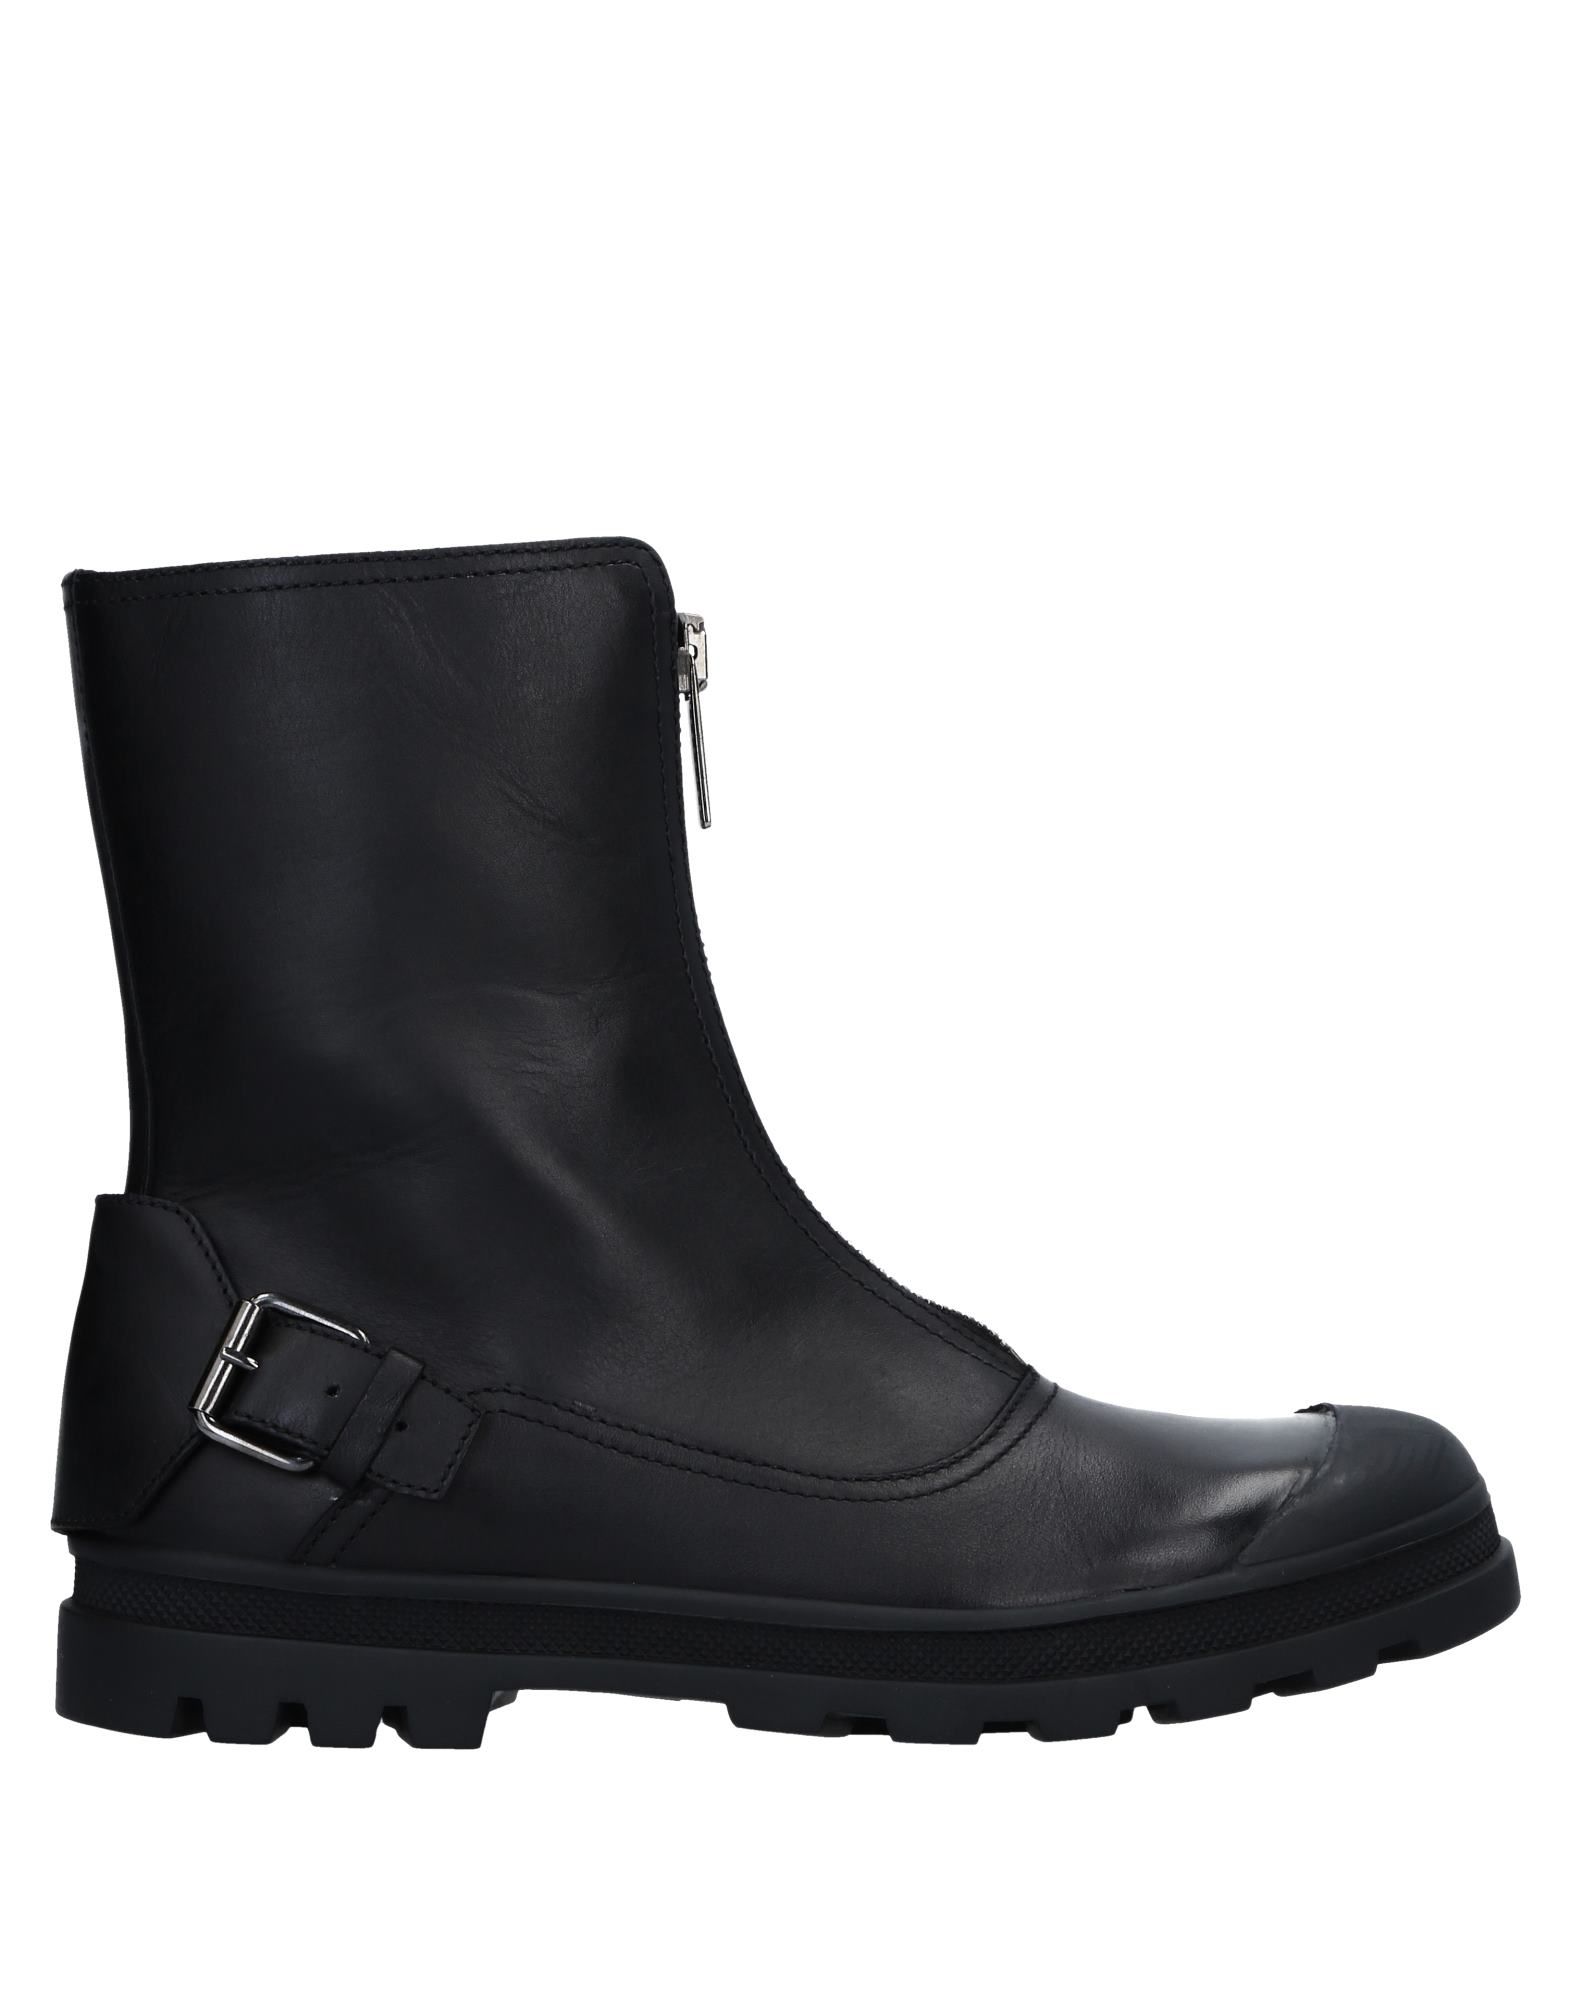 black and gold boots mens